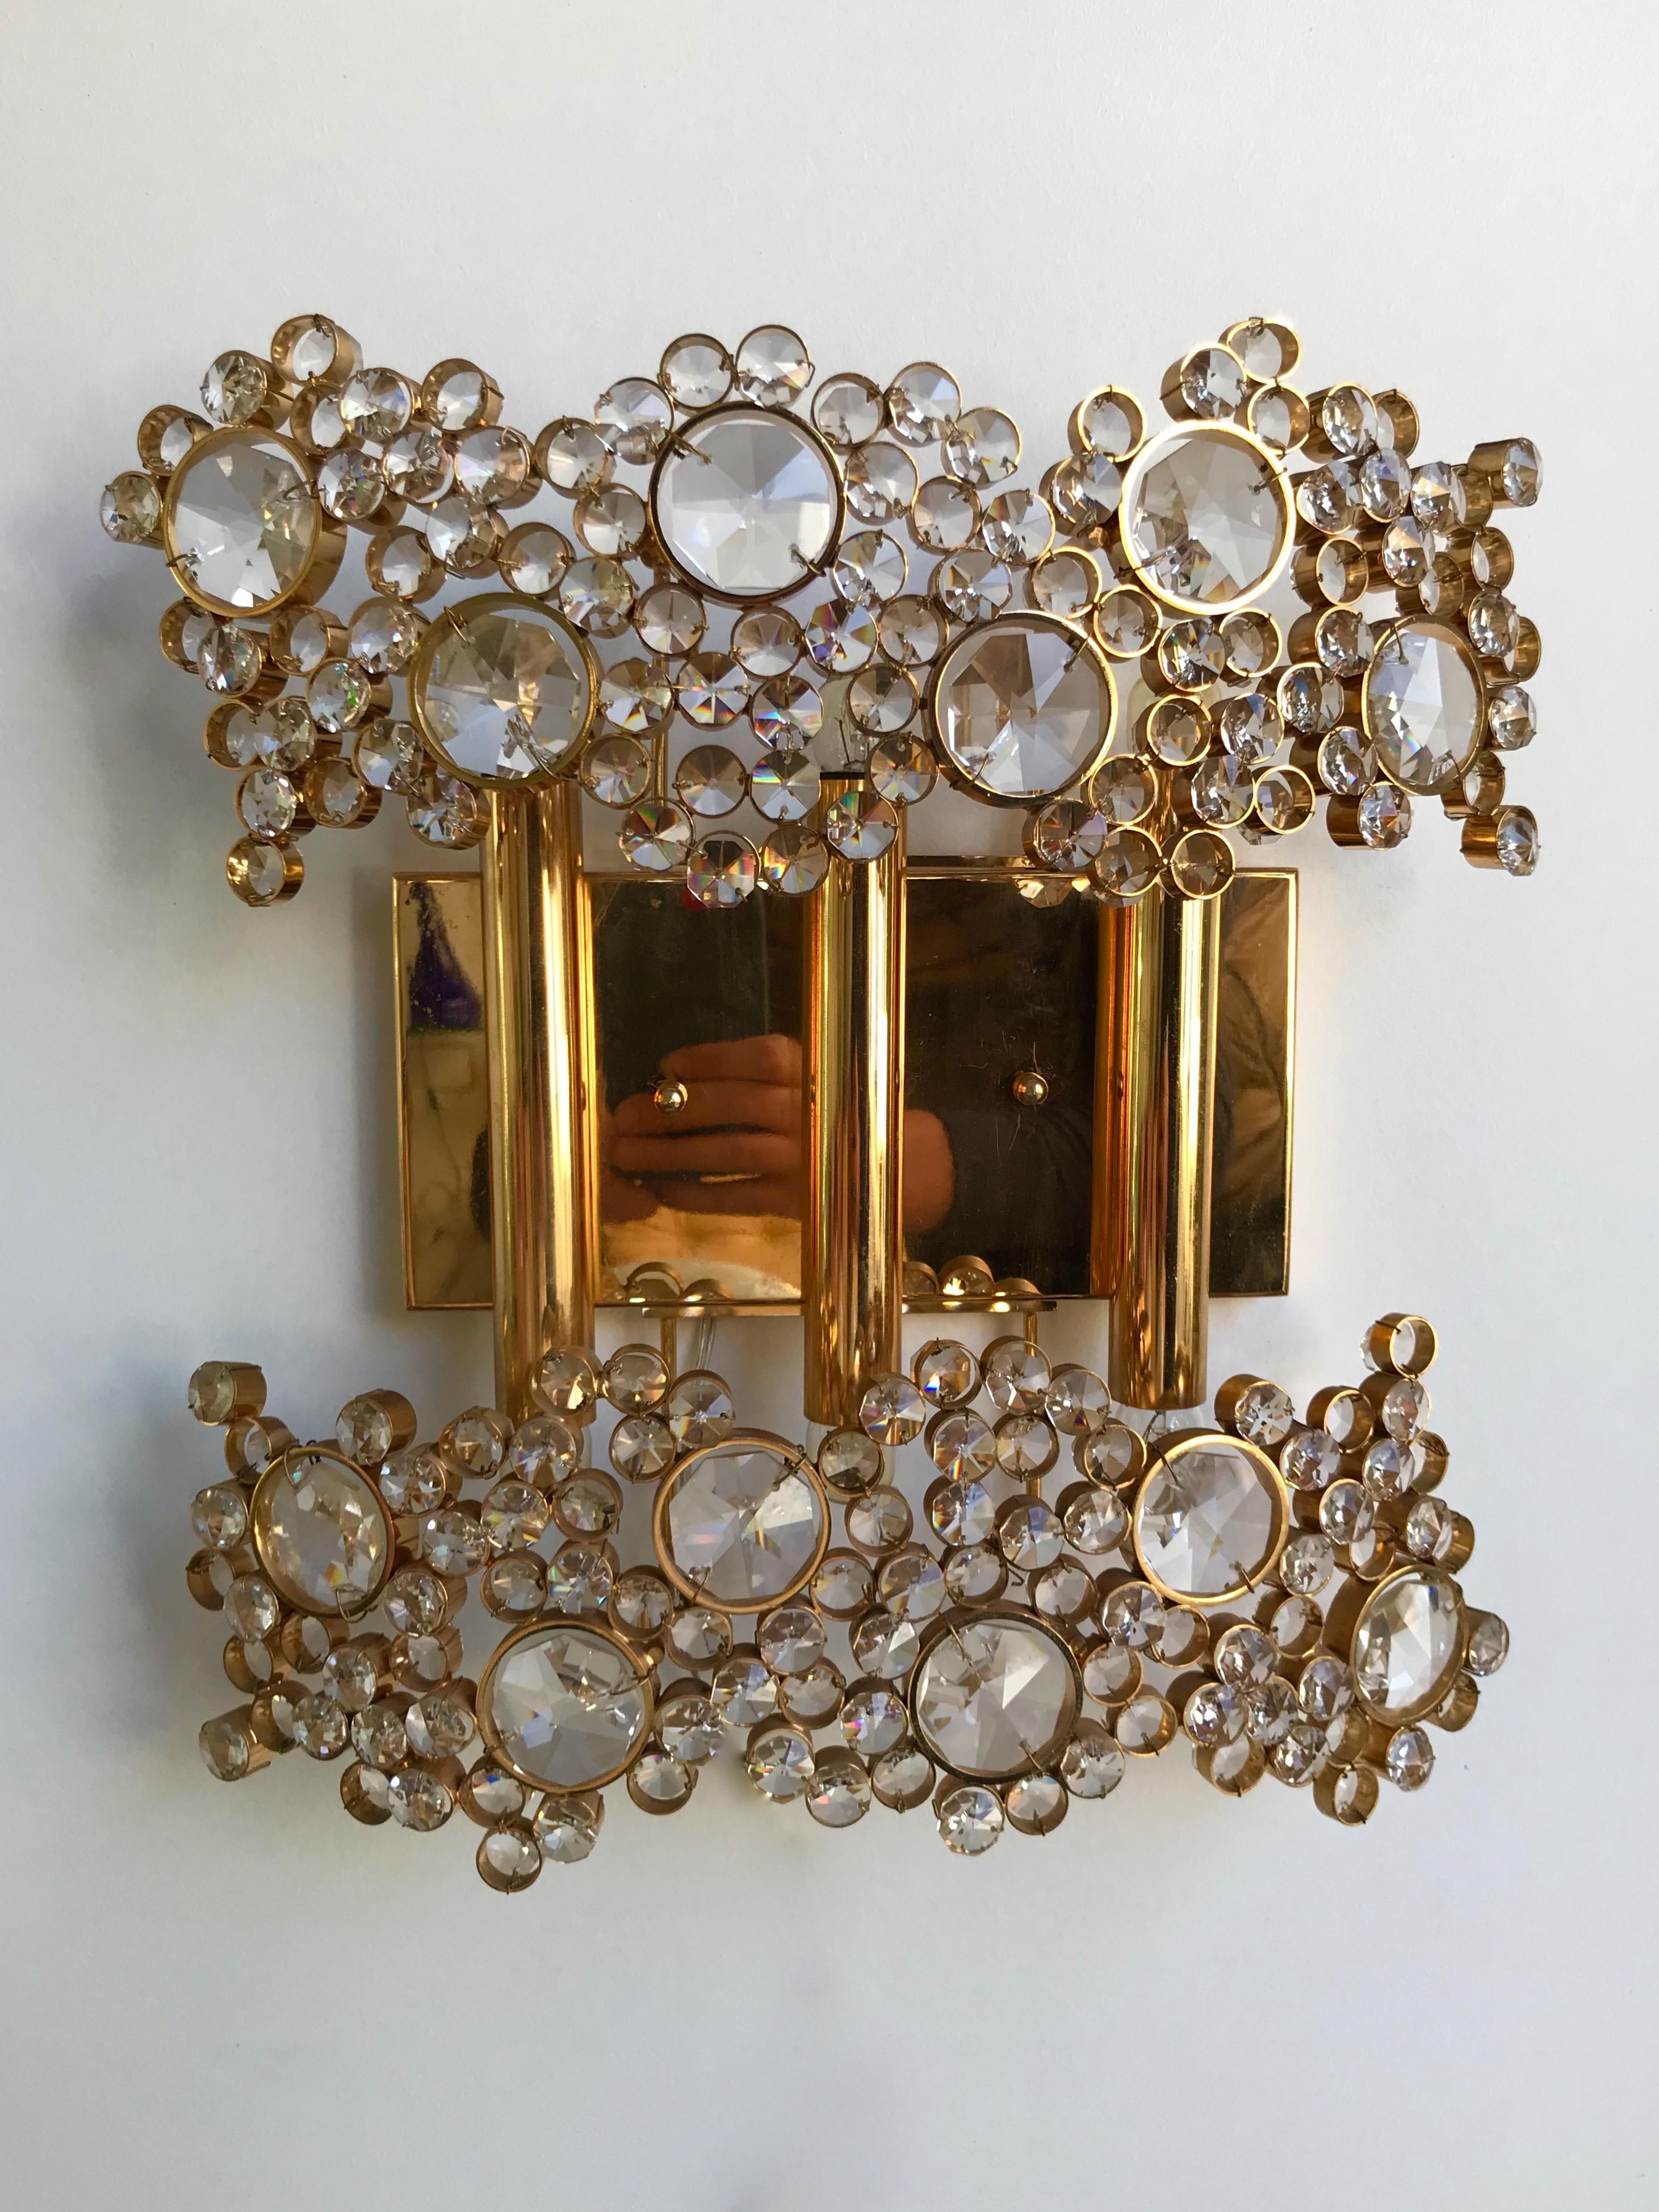 2 Pair of Brass and Crystal Glass Sconces by Palwa, Germany, 1970s (Deutsch)